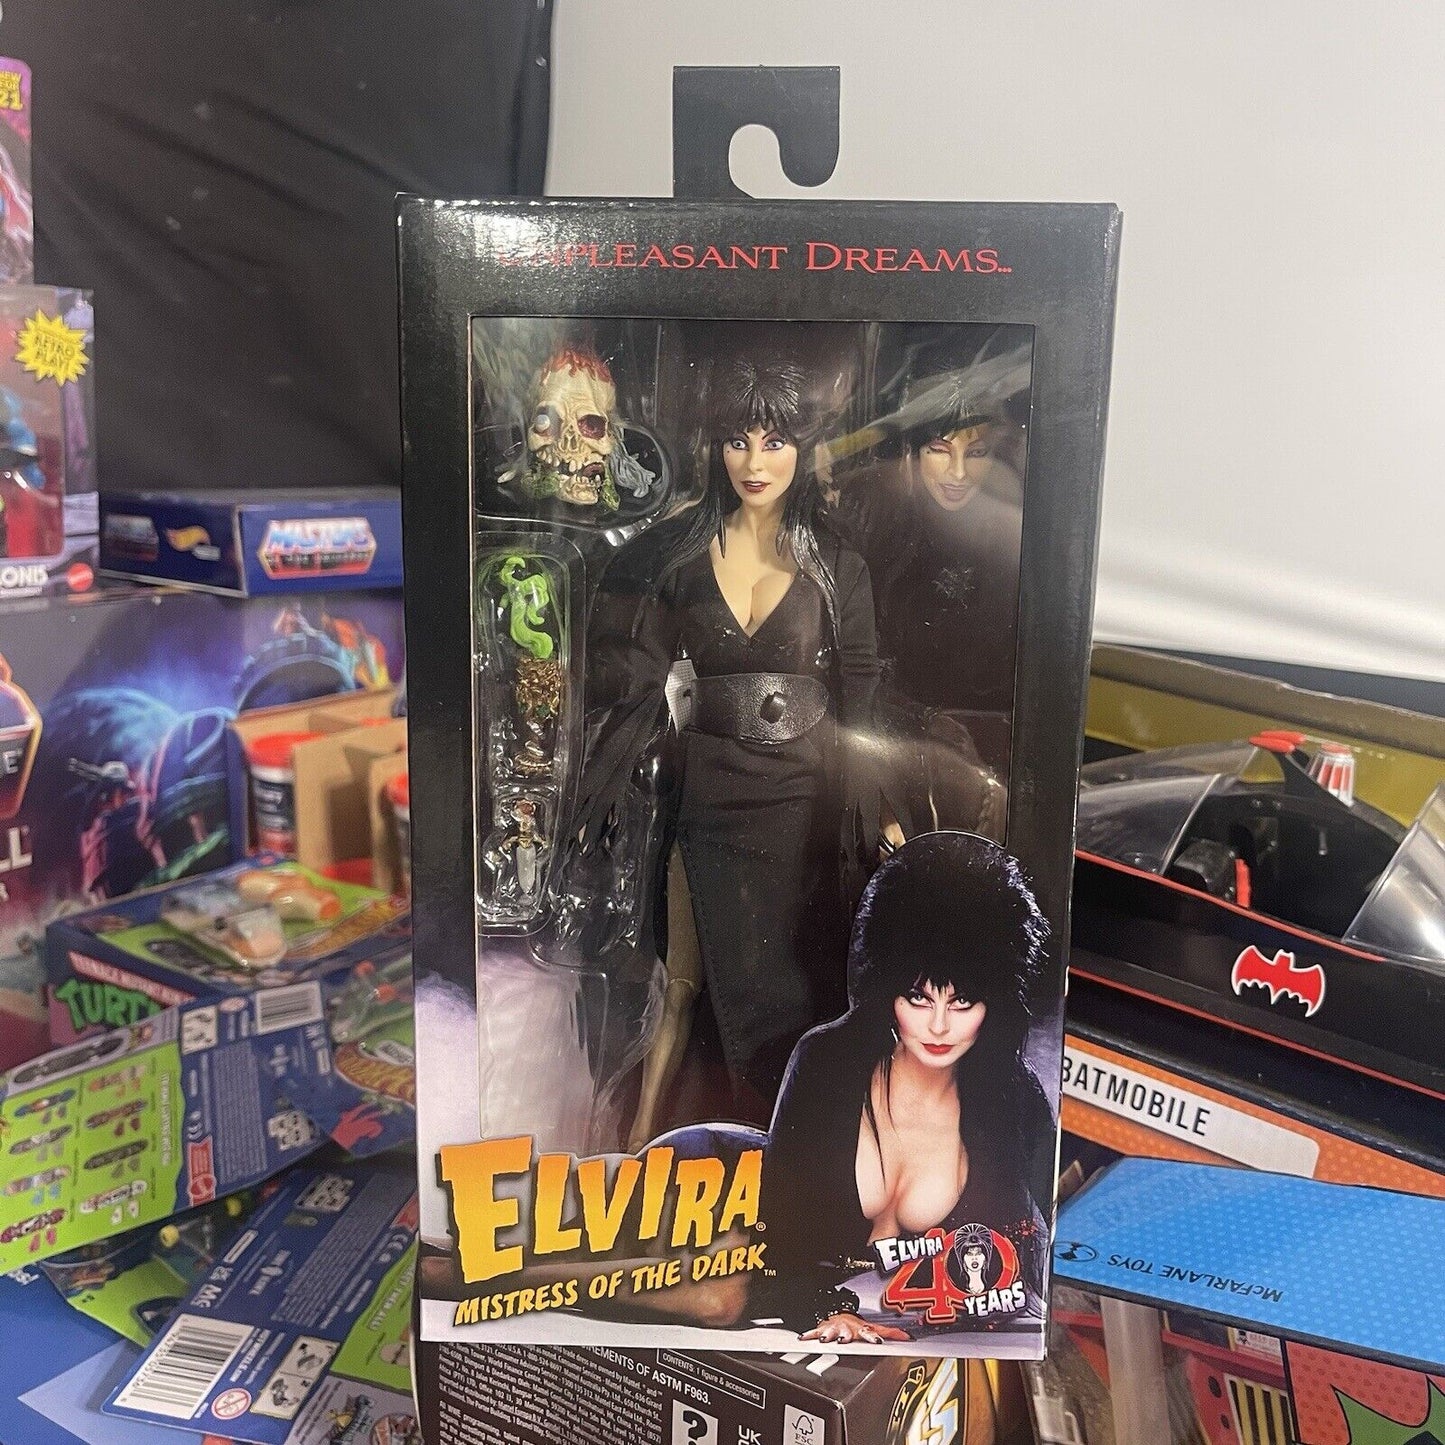 NECA Elvira Mistress of the Dark 8" Clothed Action Figure in Stock NEW